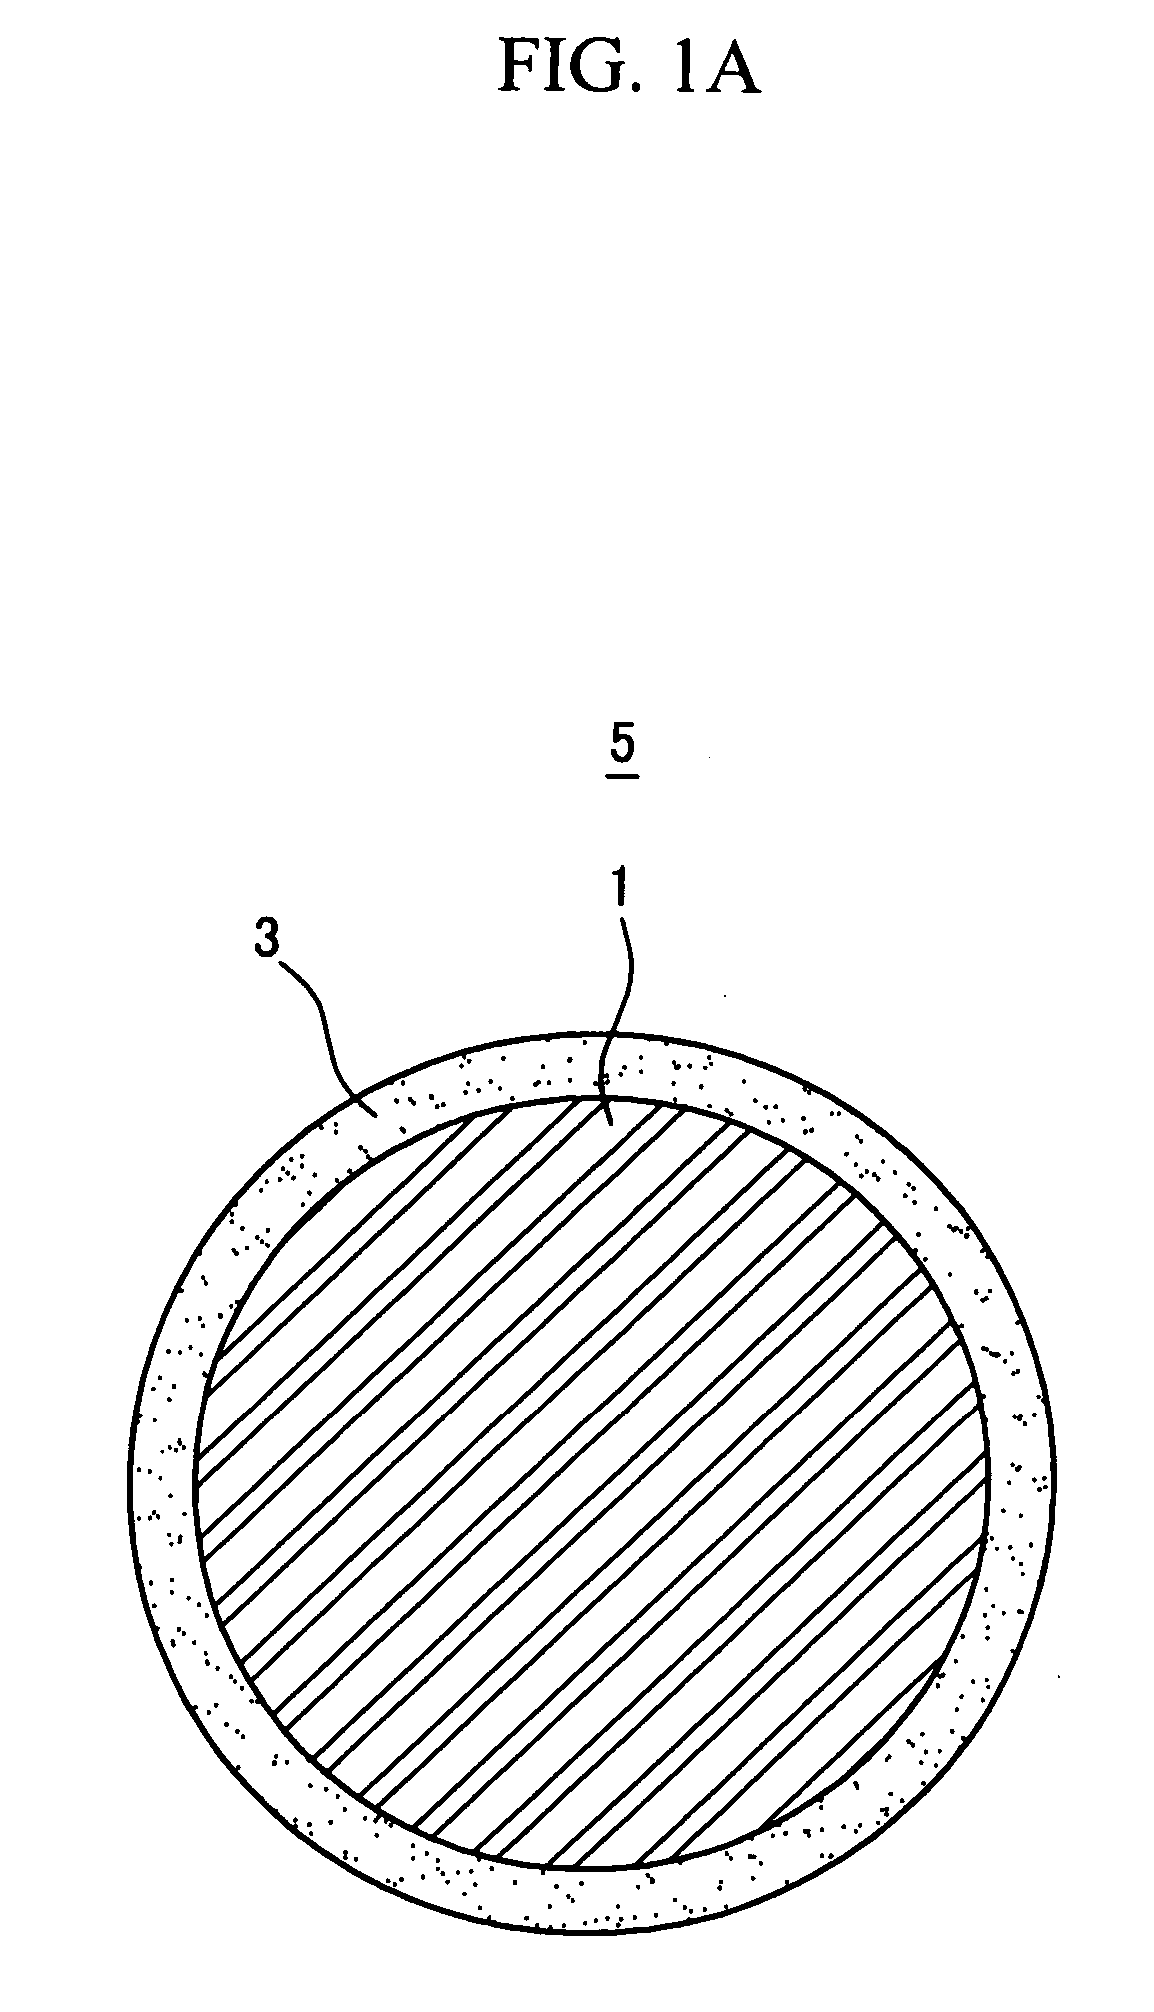 Negative active material for rechargeable lithium battery, method of preparing same and rechargeable lithium battery including same